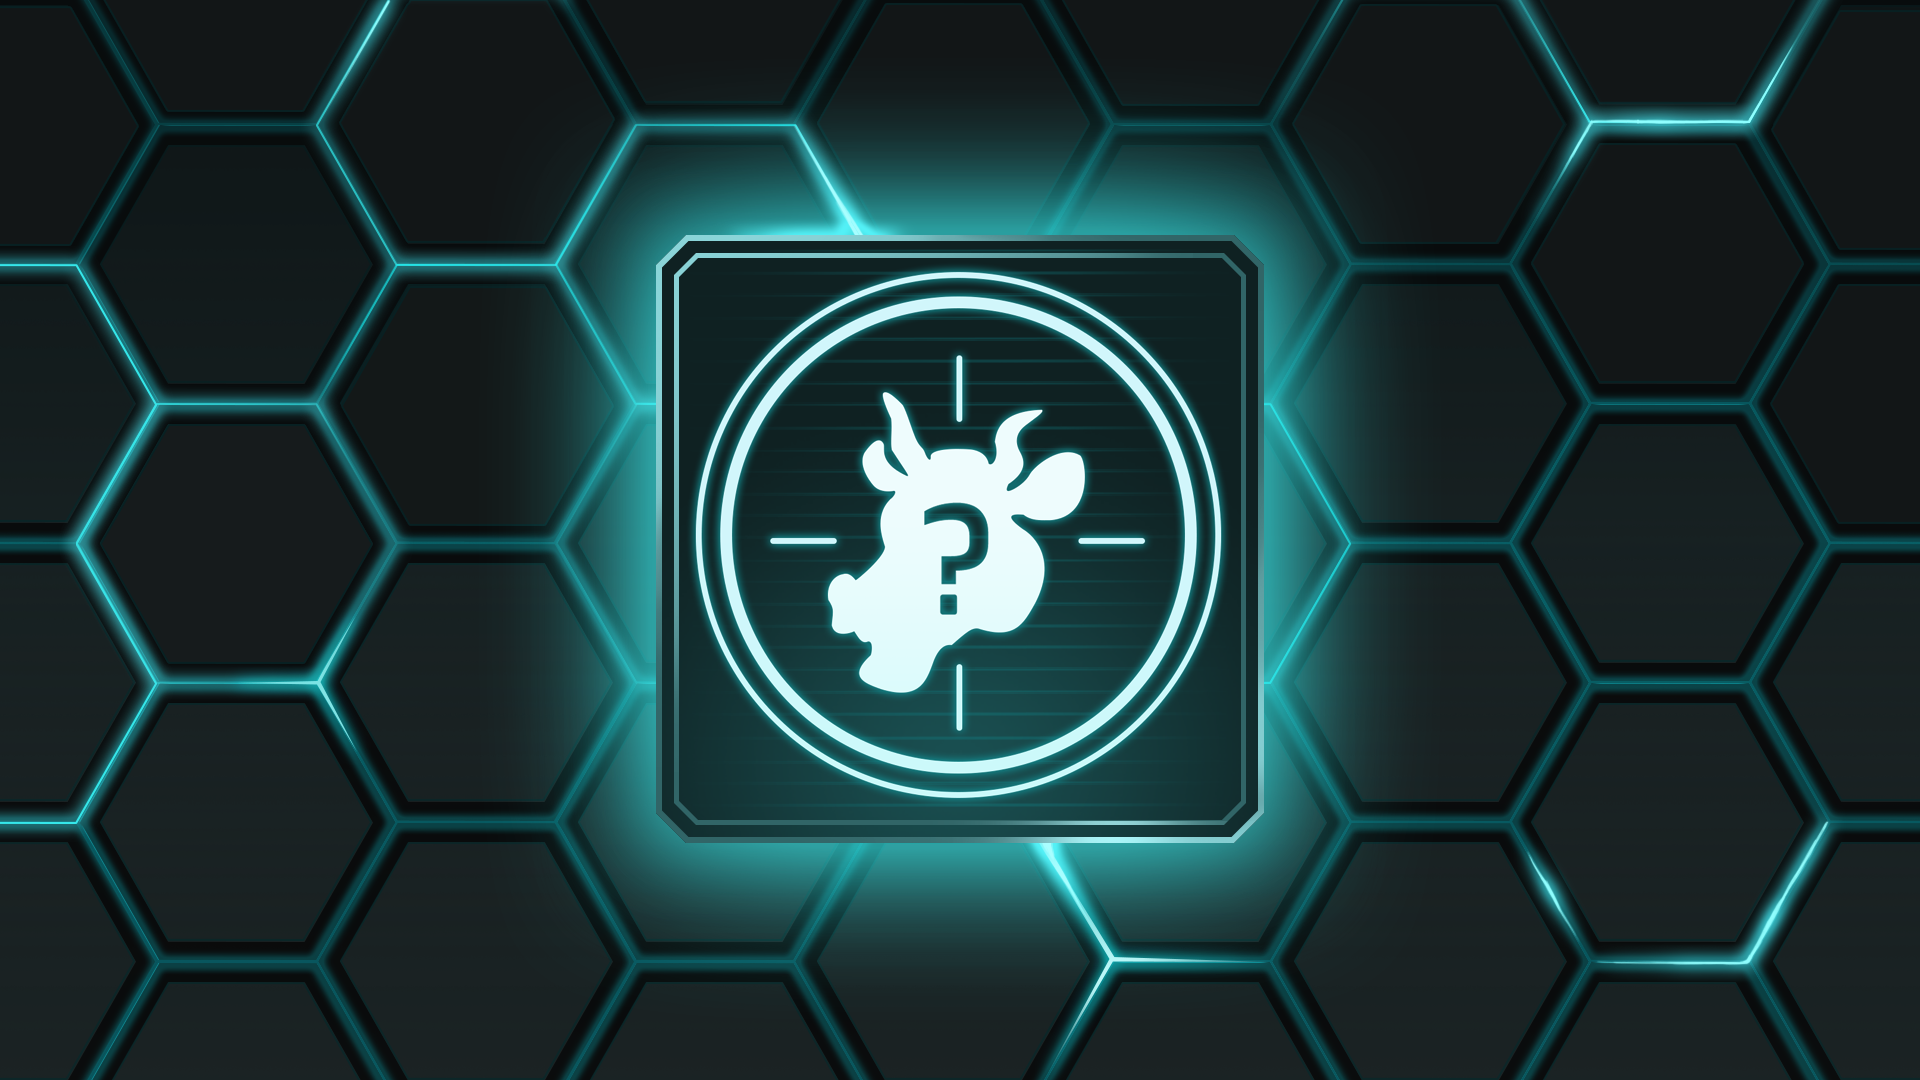 Icon for Counteragent